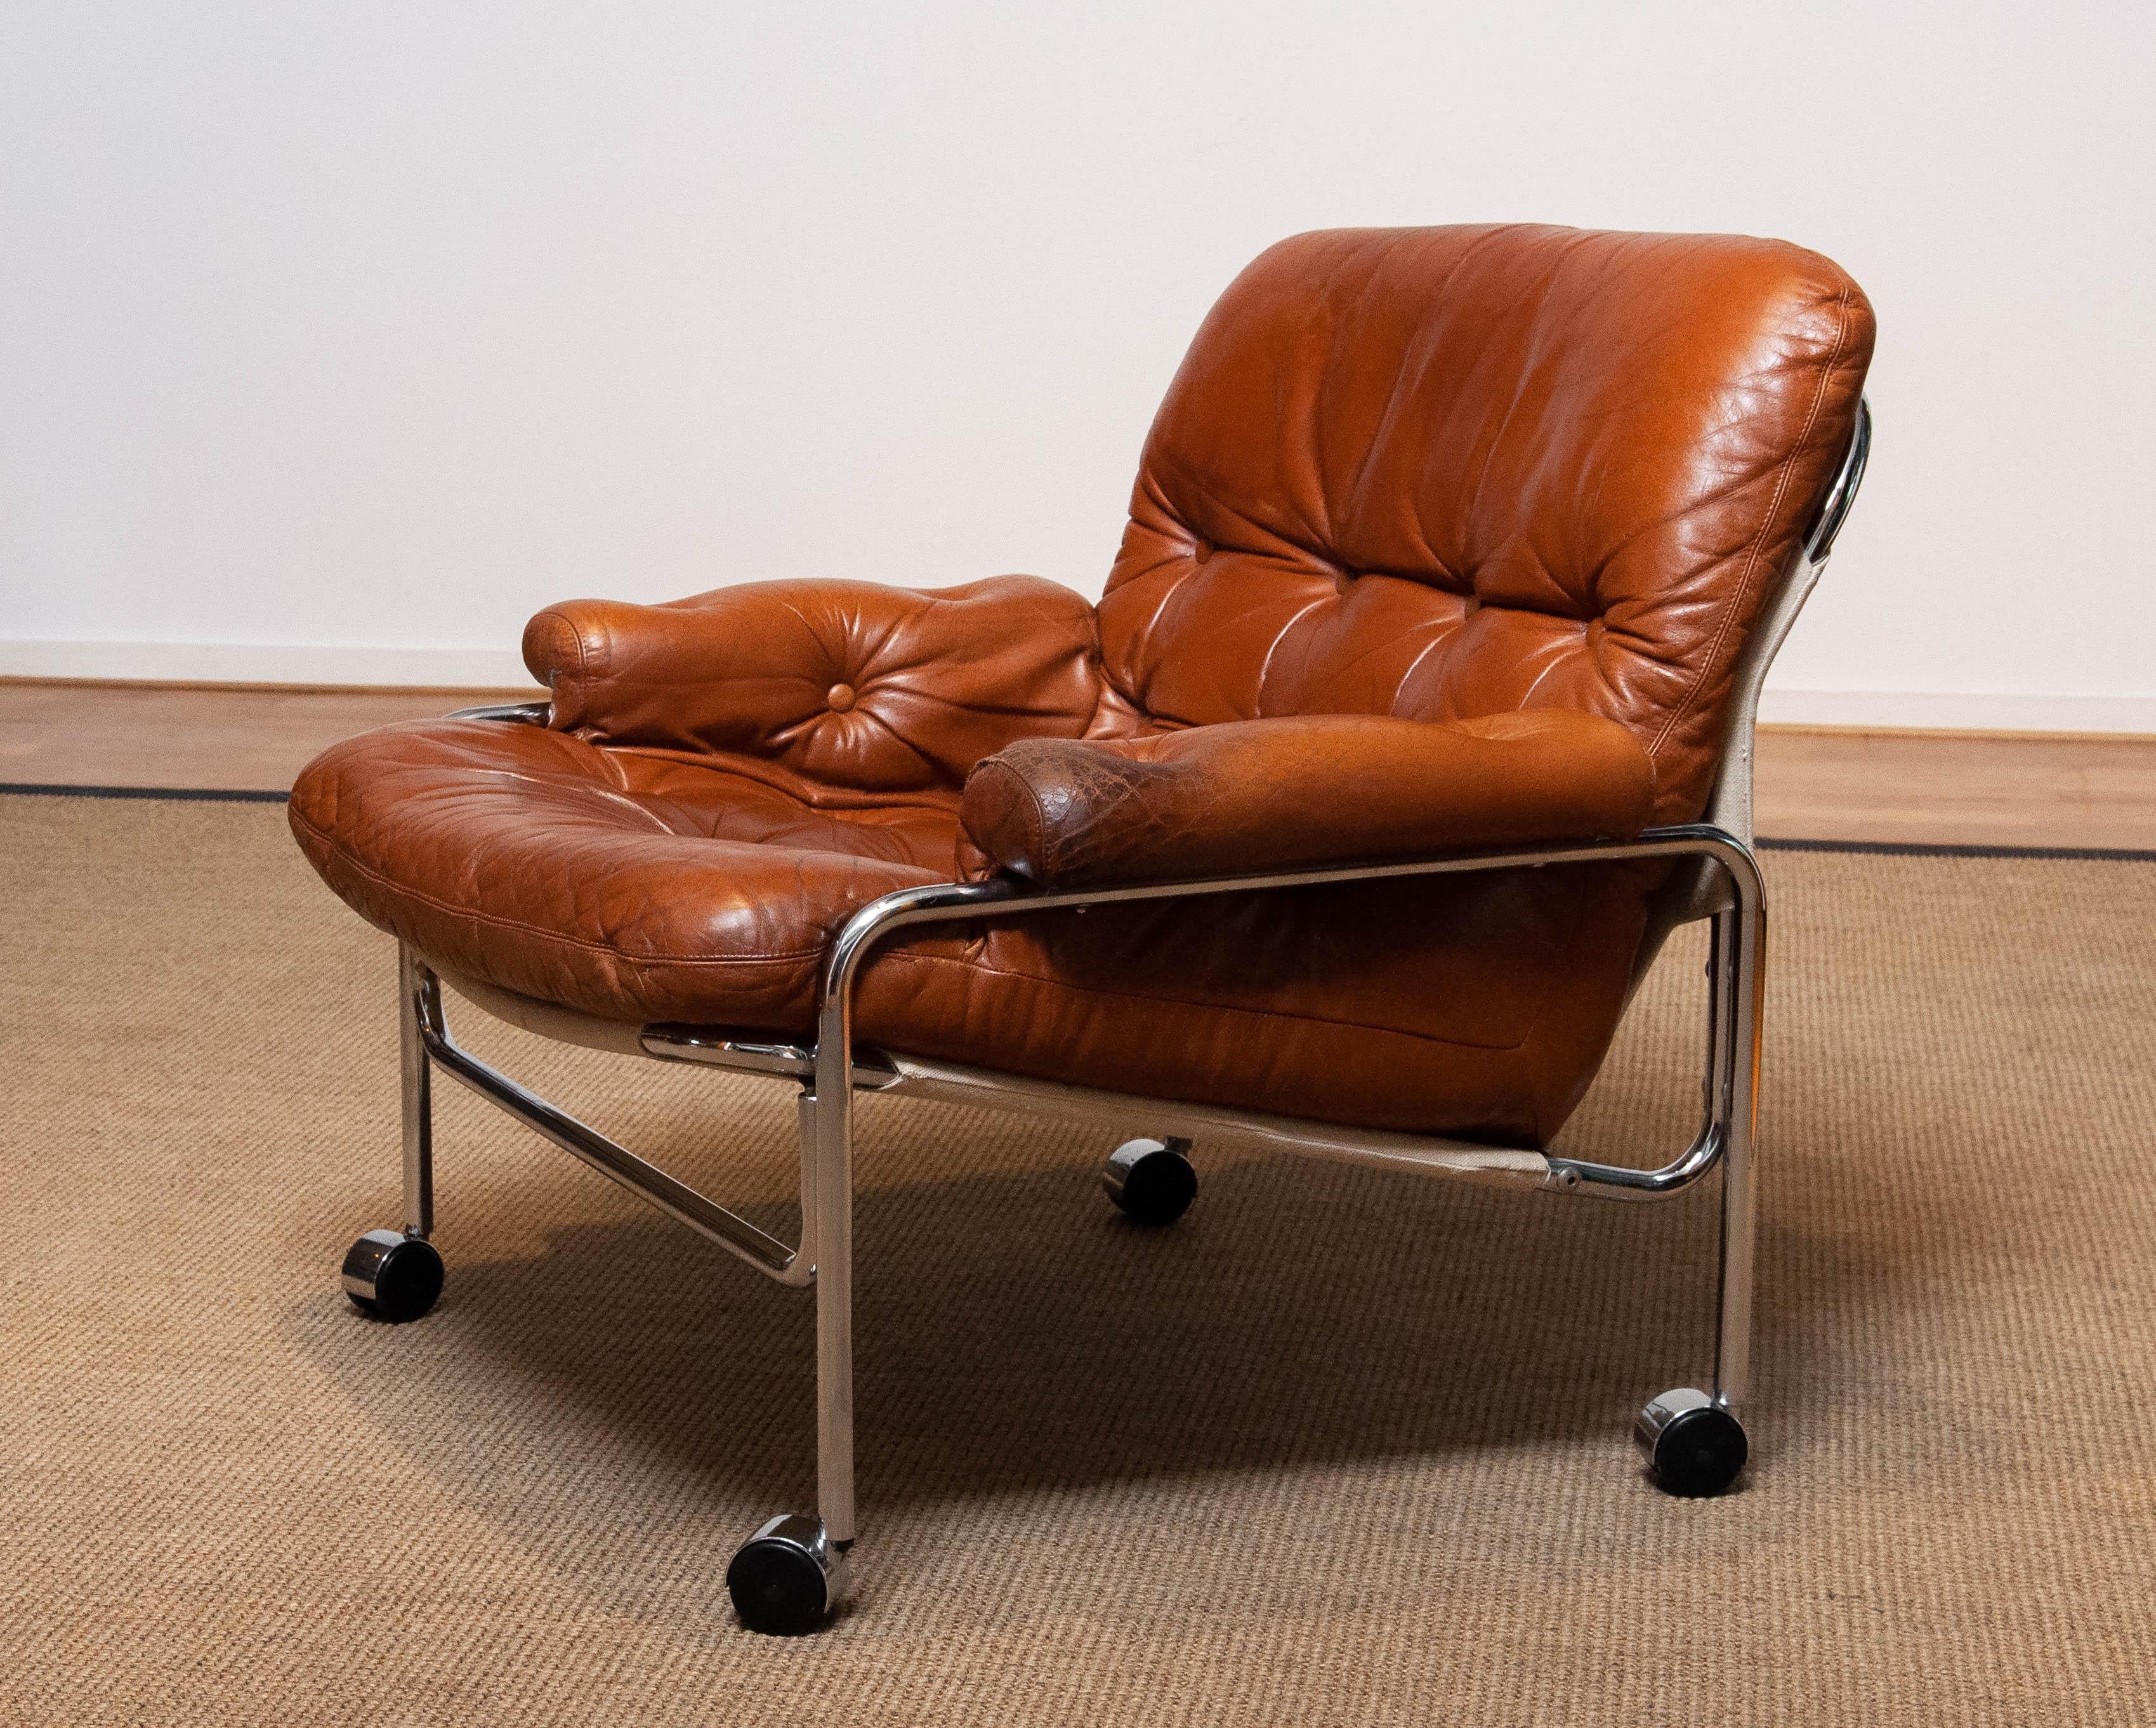 Beautiful lounge / easy chair in aged brown / tan leather with great patina and tubular chrome metal tubular frame designed by Pethrus Lindlöfs for A.B. Lindlöfs Möbler Lammhult, Sweden. Model Eva.
The aged leather gives this chair the typical